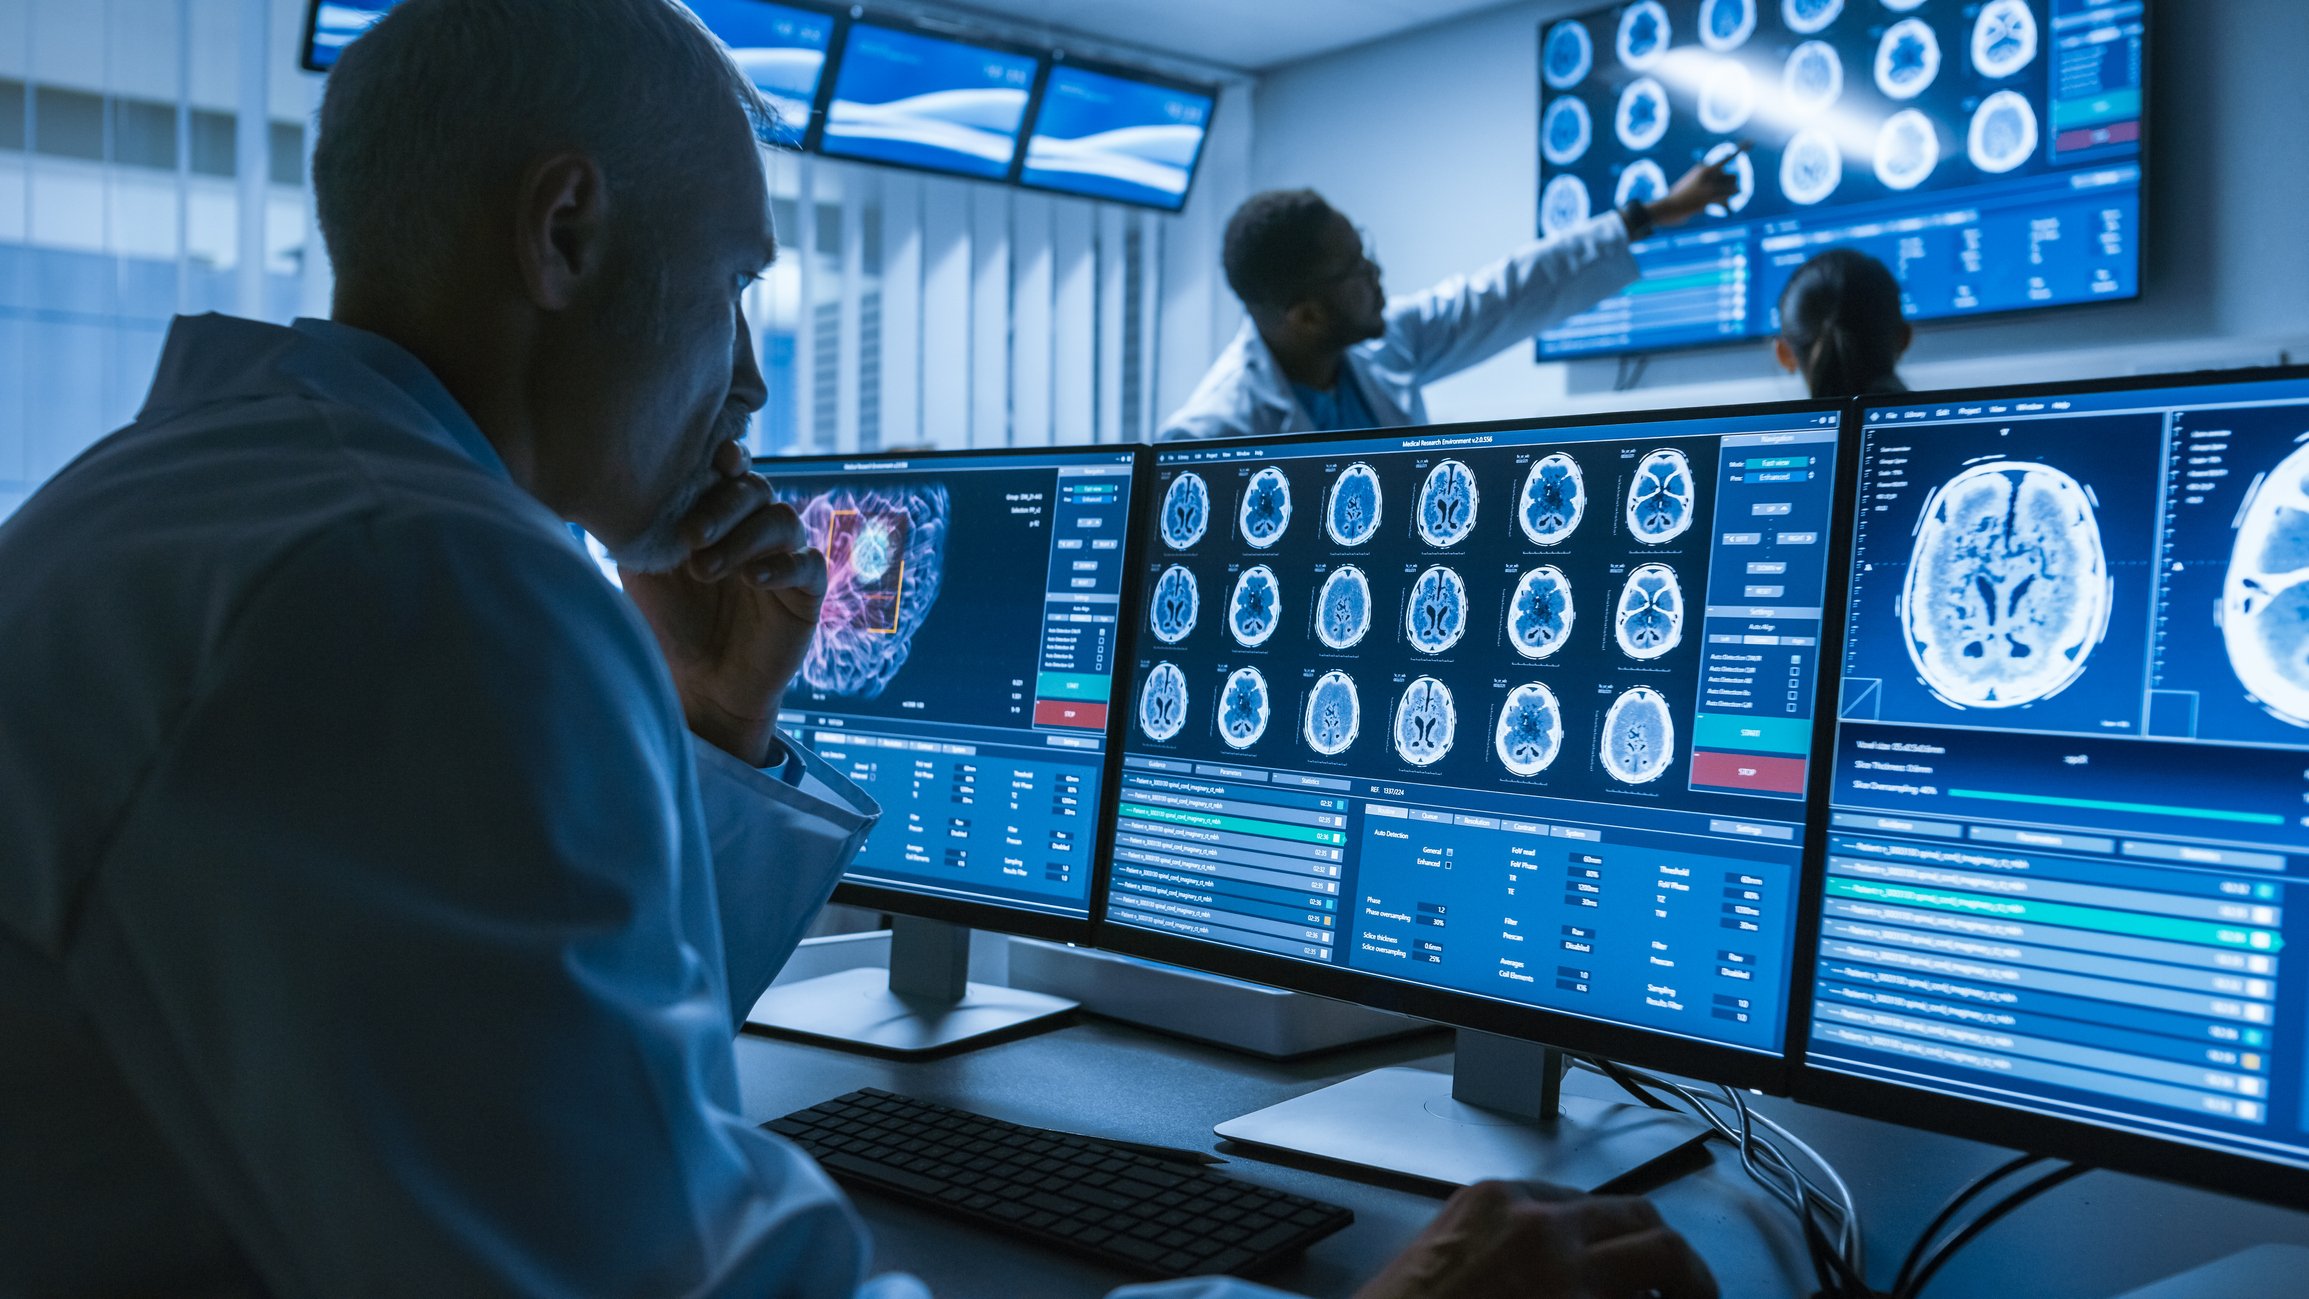 Digital pathology experts say that human-centered augmented intelligence will remain the standard for pathology, radiology